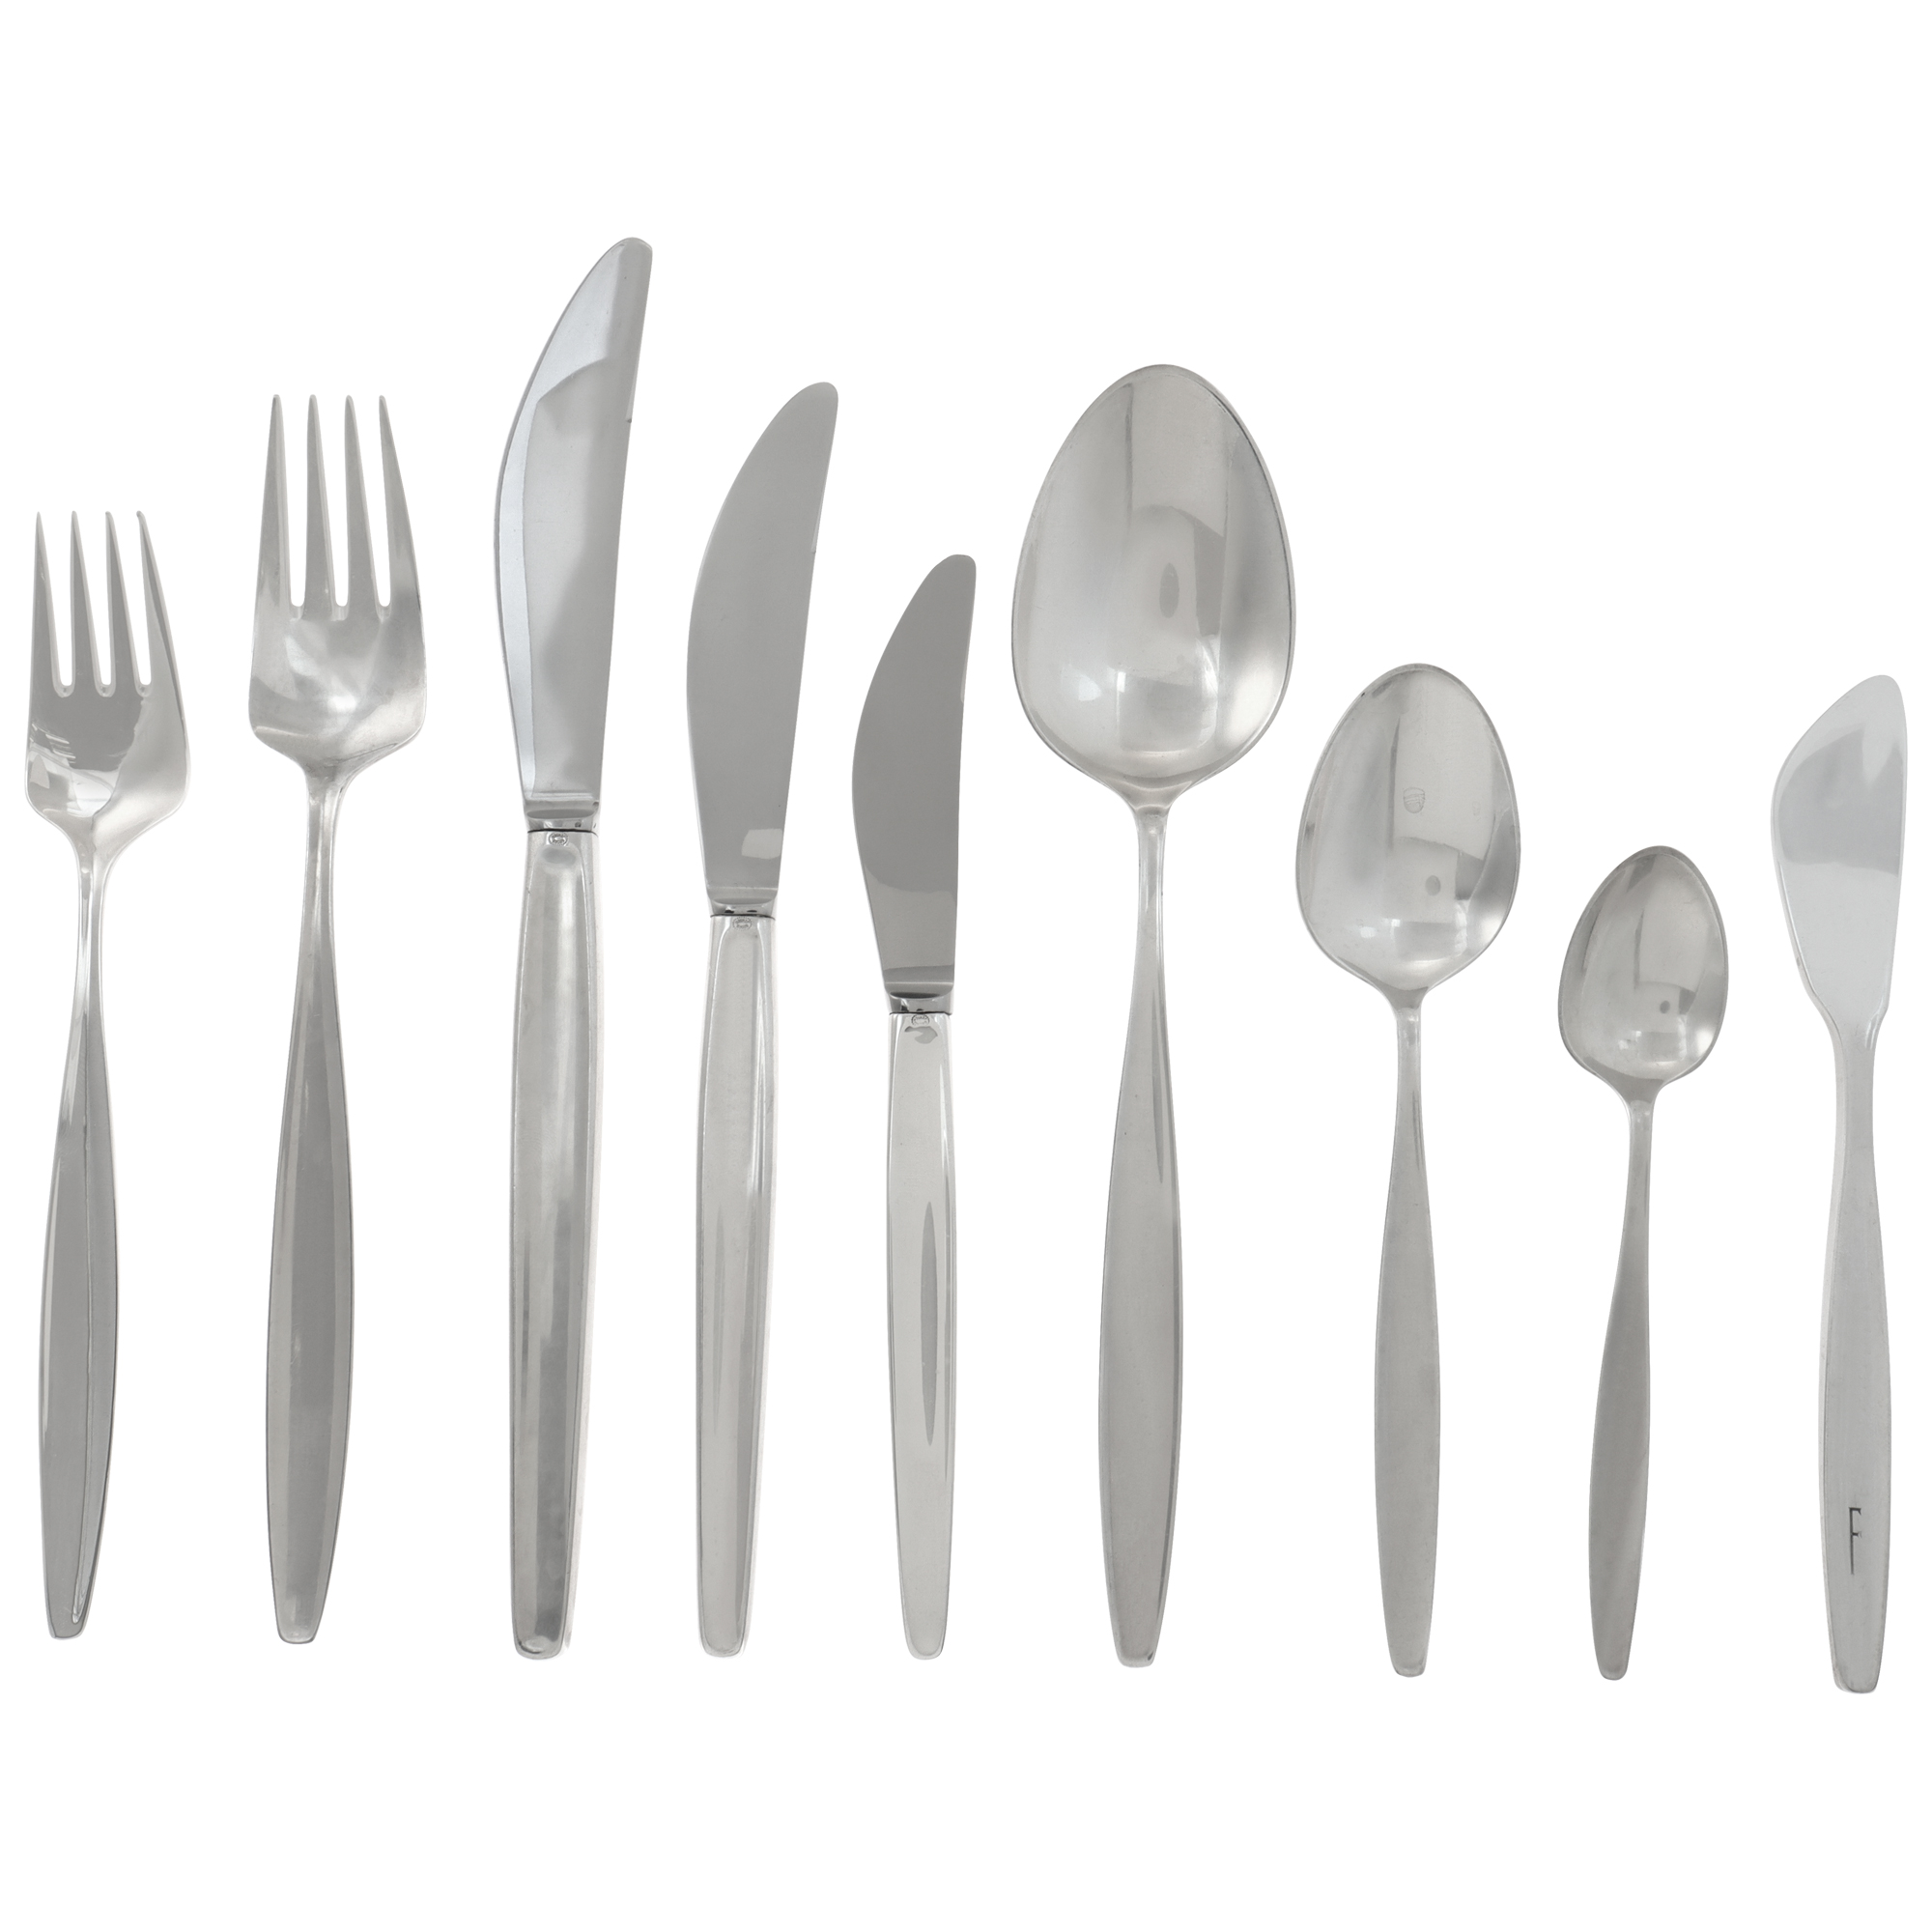 CYPRESS by GEORG JENSEN Sterling Silver Flatware Set patented in 1953.100 pieces- 5 x 12 place setting (with xtra) & 7 serving pieces. (Default)